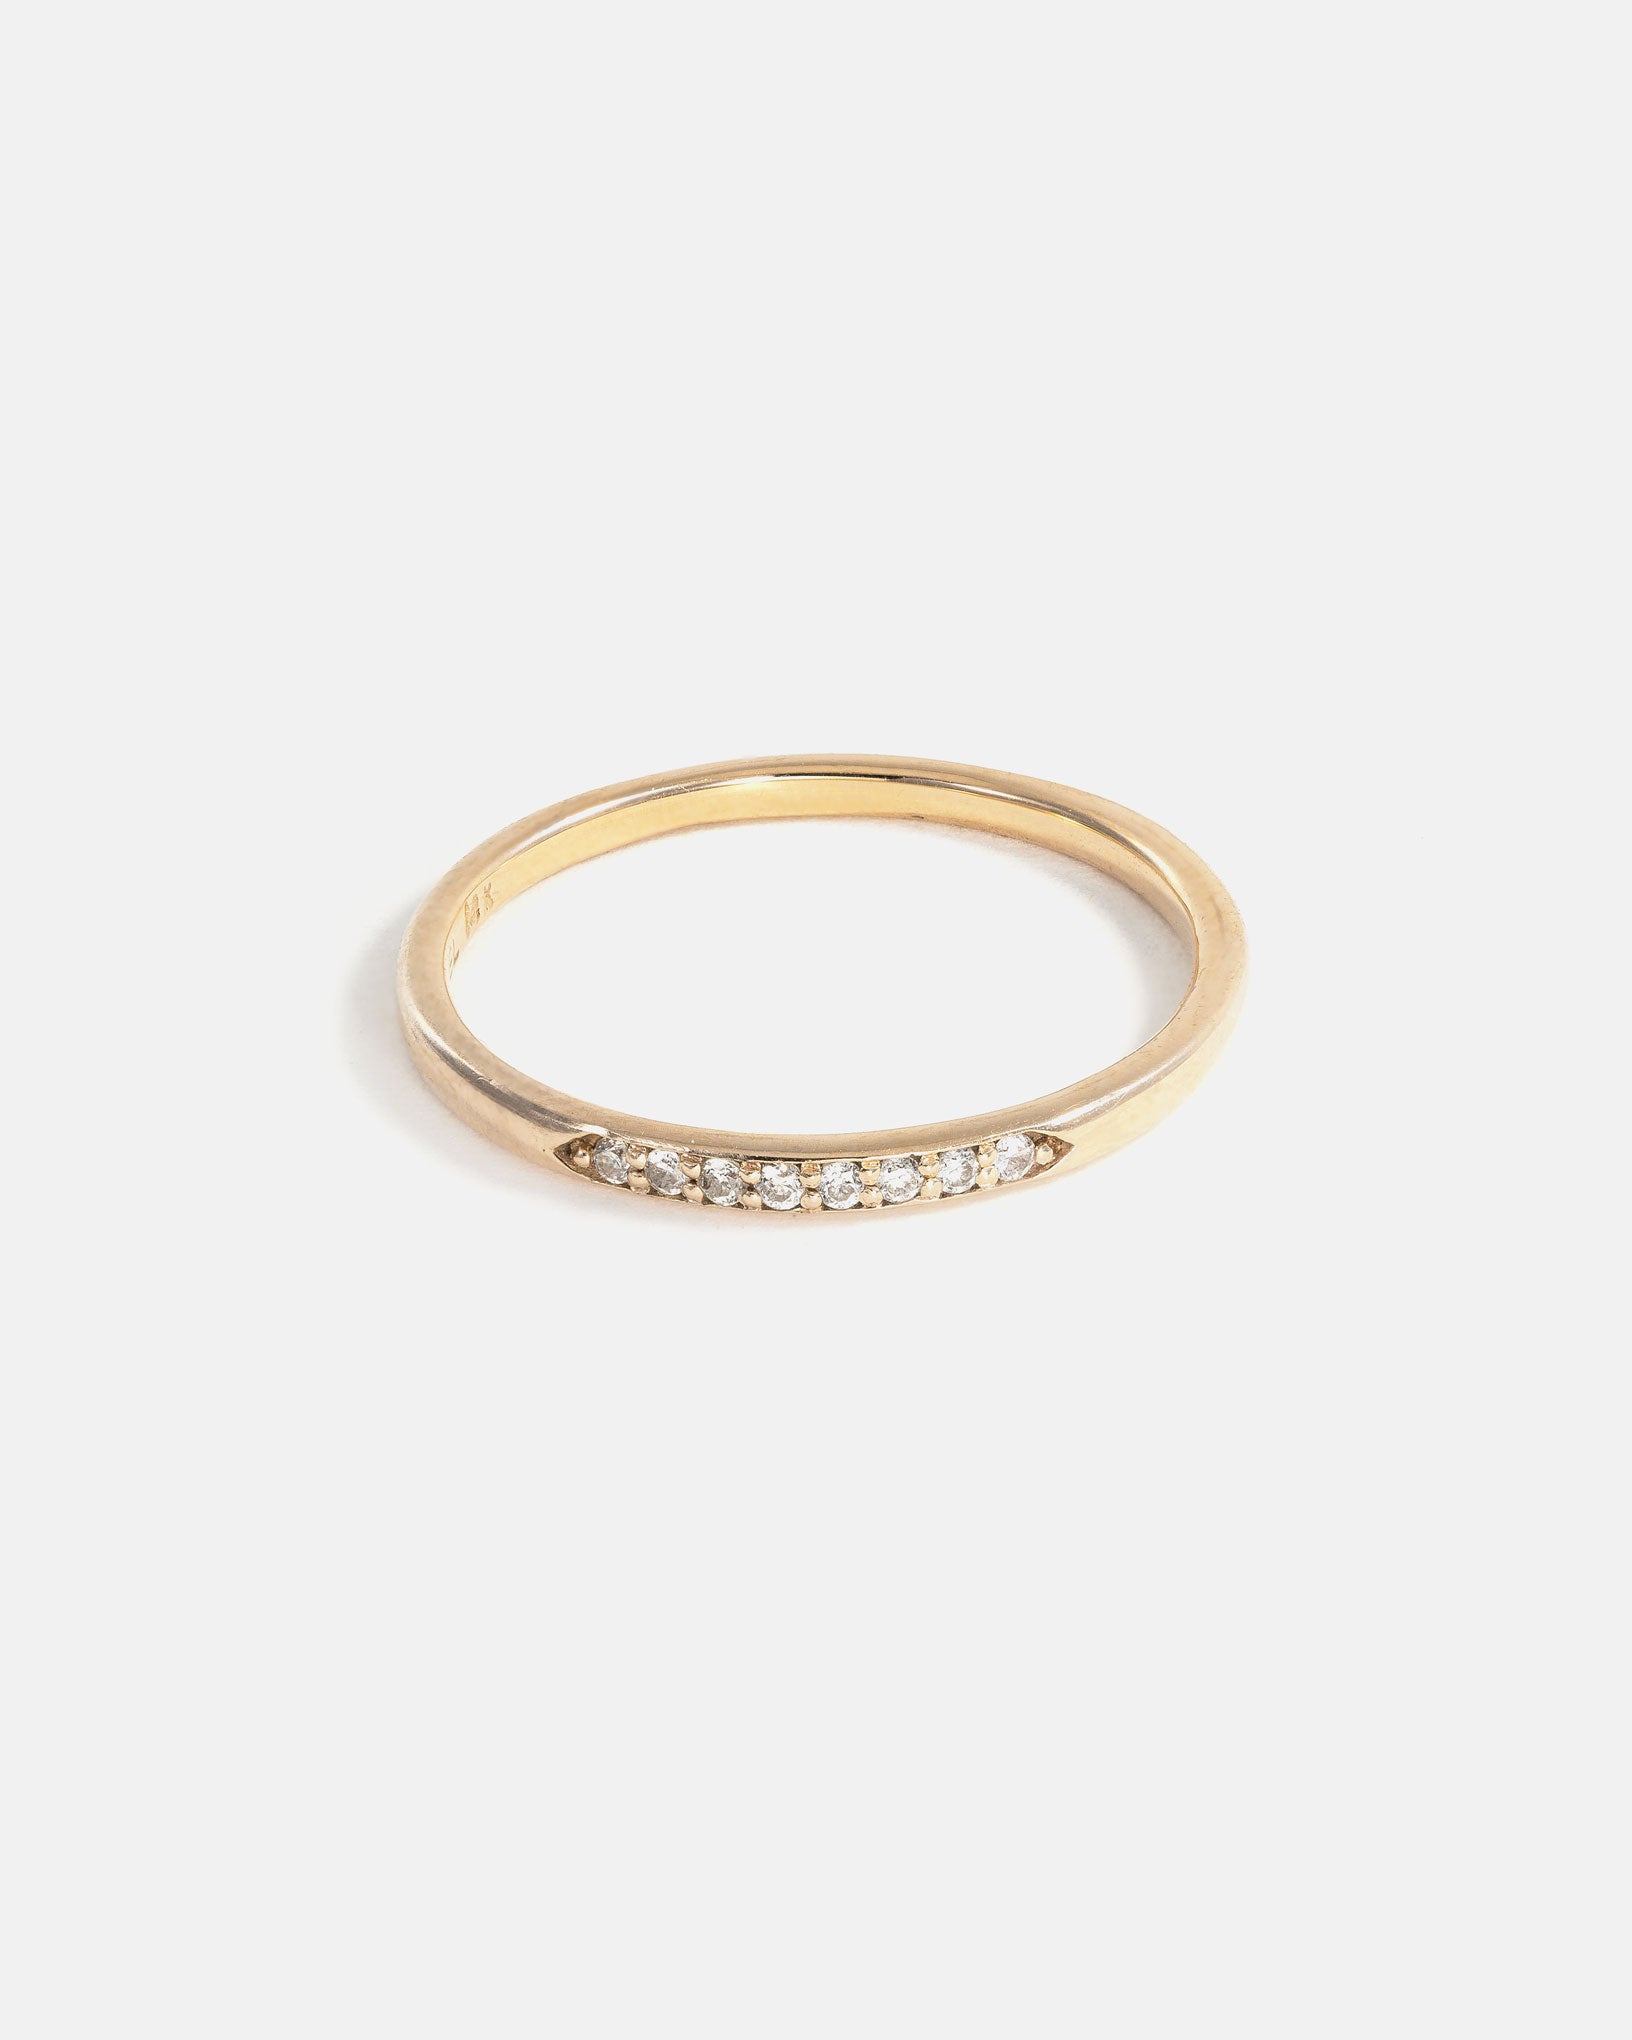 Stratura Wedding Ring in Yellow Gold with Ethical Birthstones